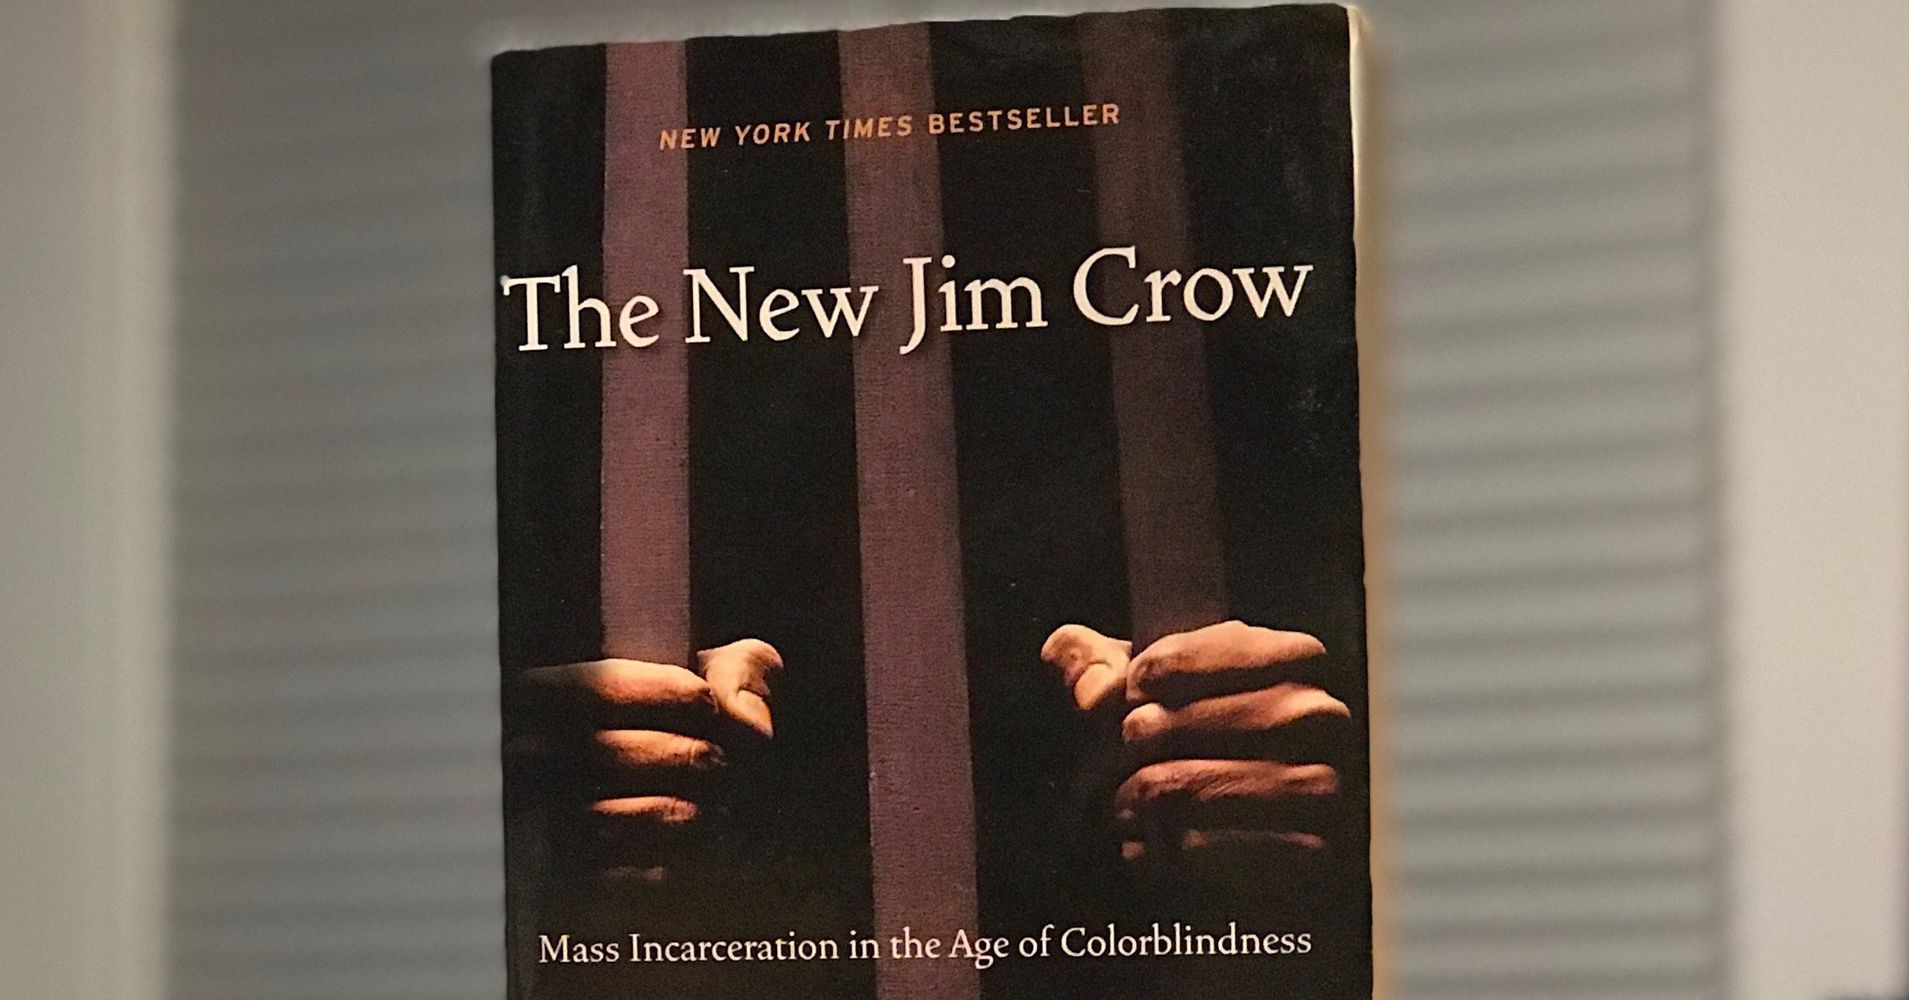 New Jersey Prisons End Ban On 'The New Jim Crow' After ACLU Protests ...